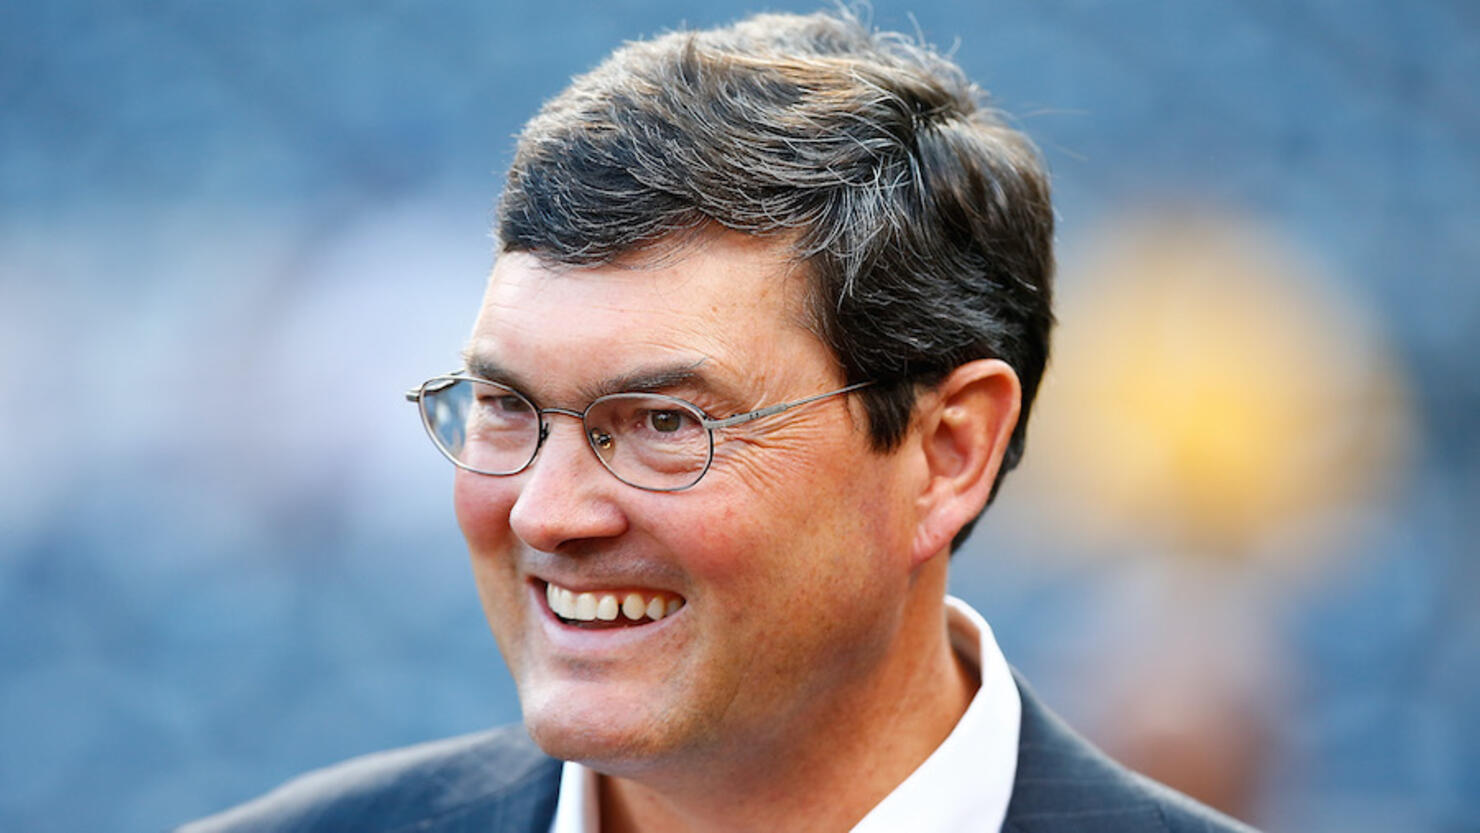 Bob Nutting claiming he's going to keep extending Pittsburgh